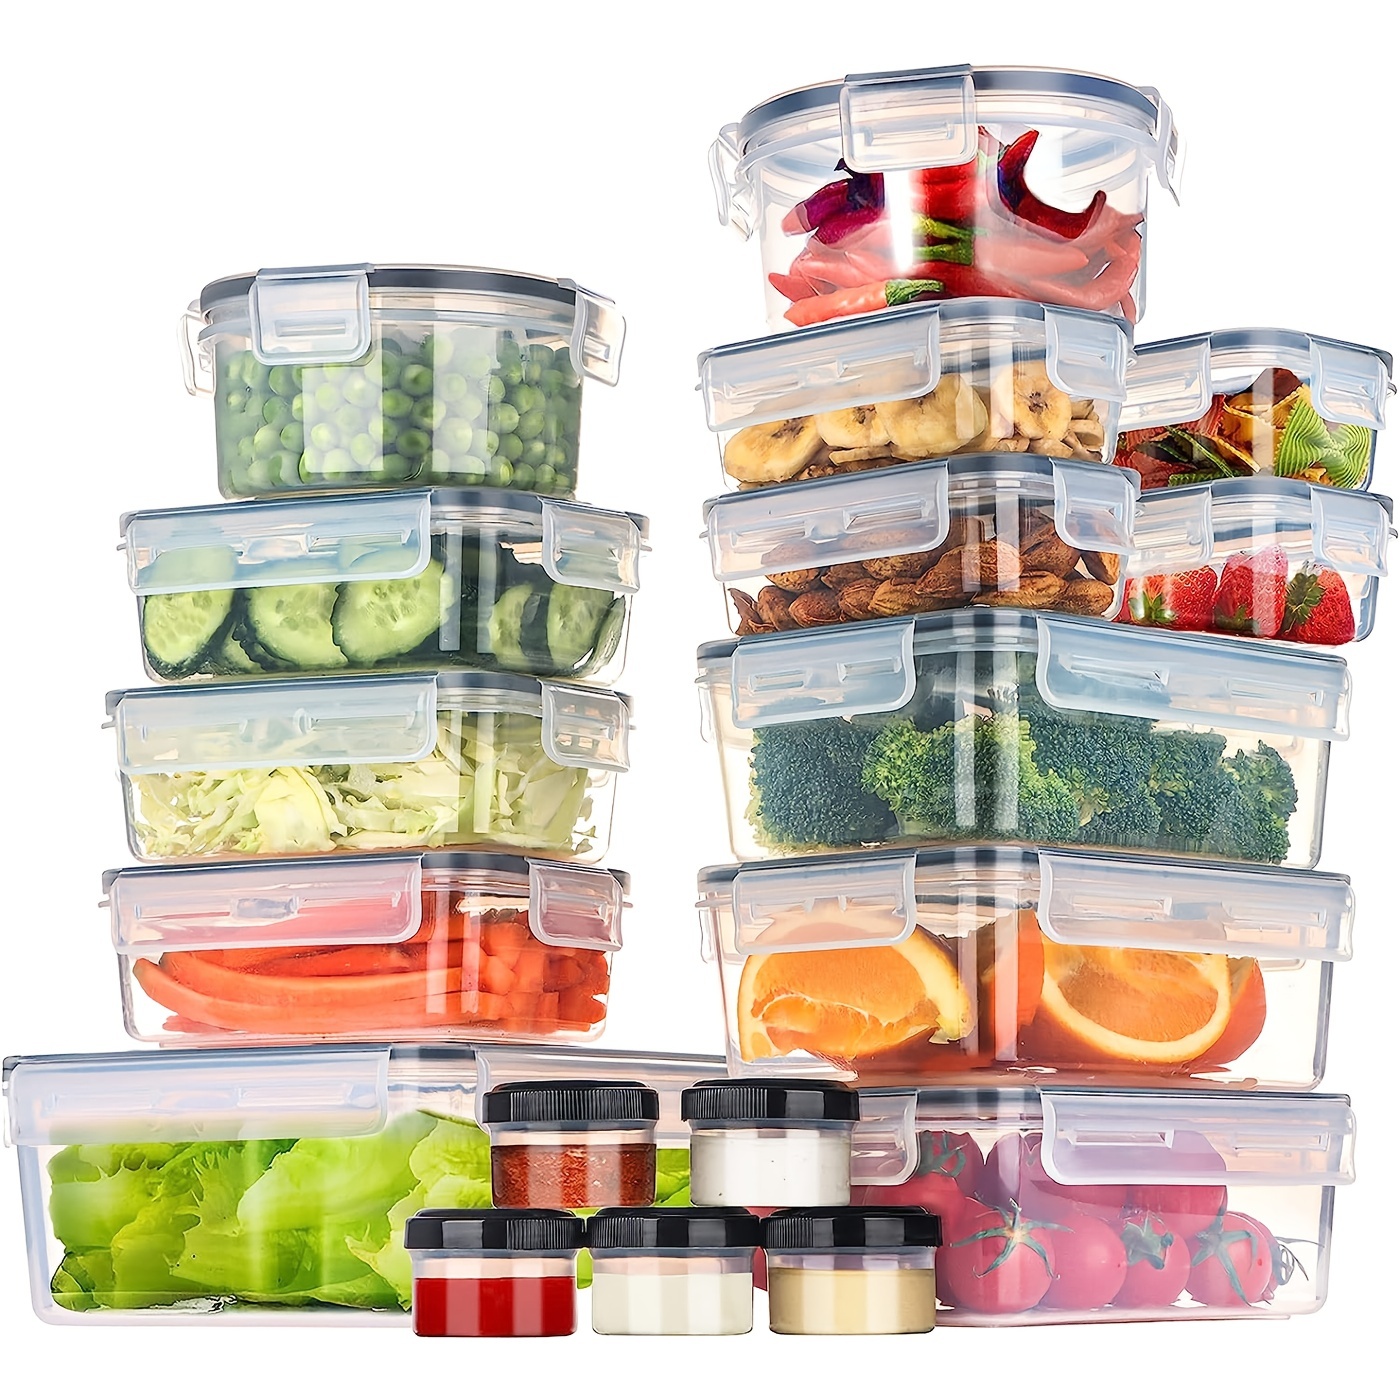 Travelwnat Food Storage Containers with Lids - Plastic Food Containers with  Lids - Plastic Containers with Lids BPA-Free - Leftover Food Containers 